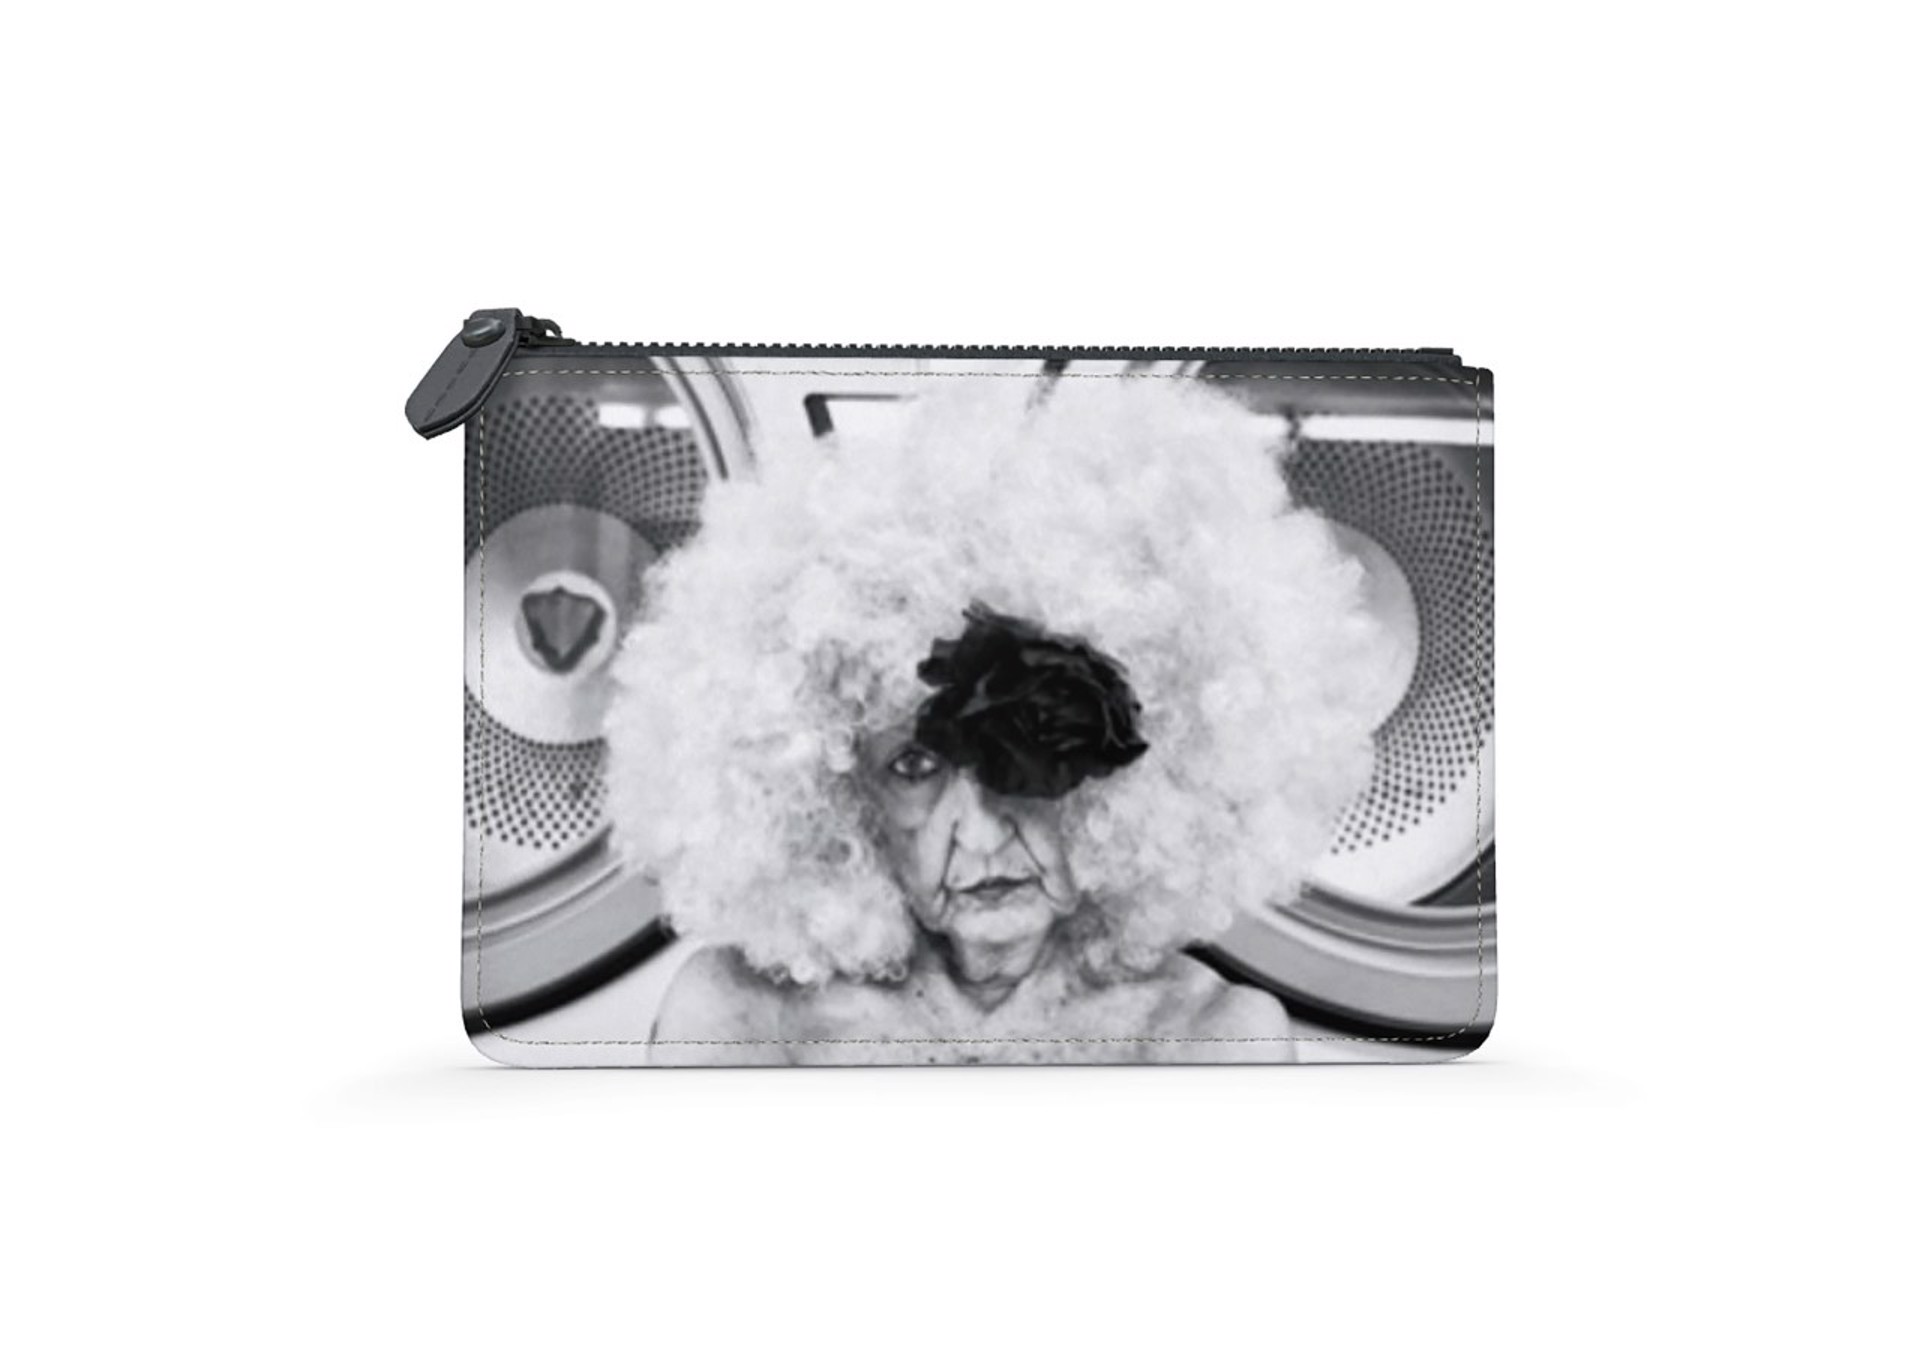 She goes on and on (clutch) by Marjorie Salvaterra